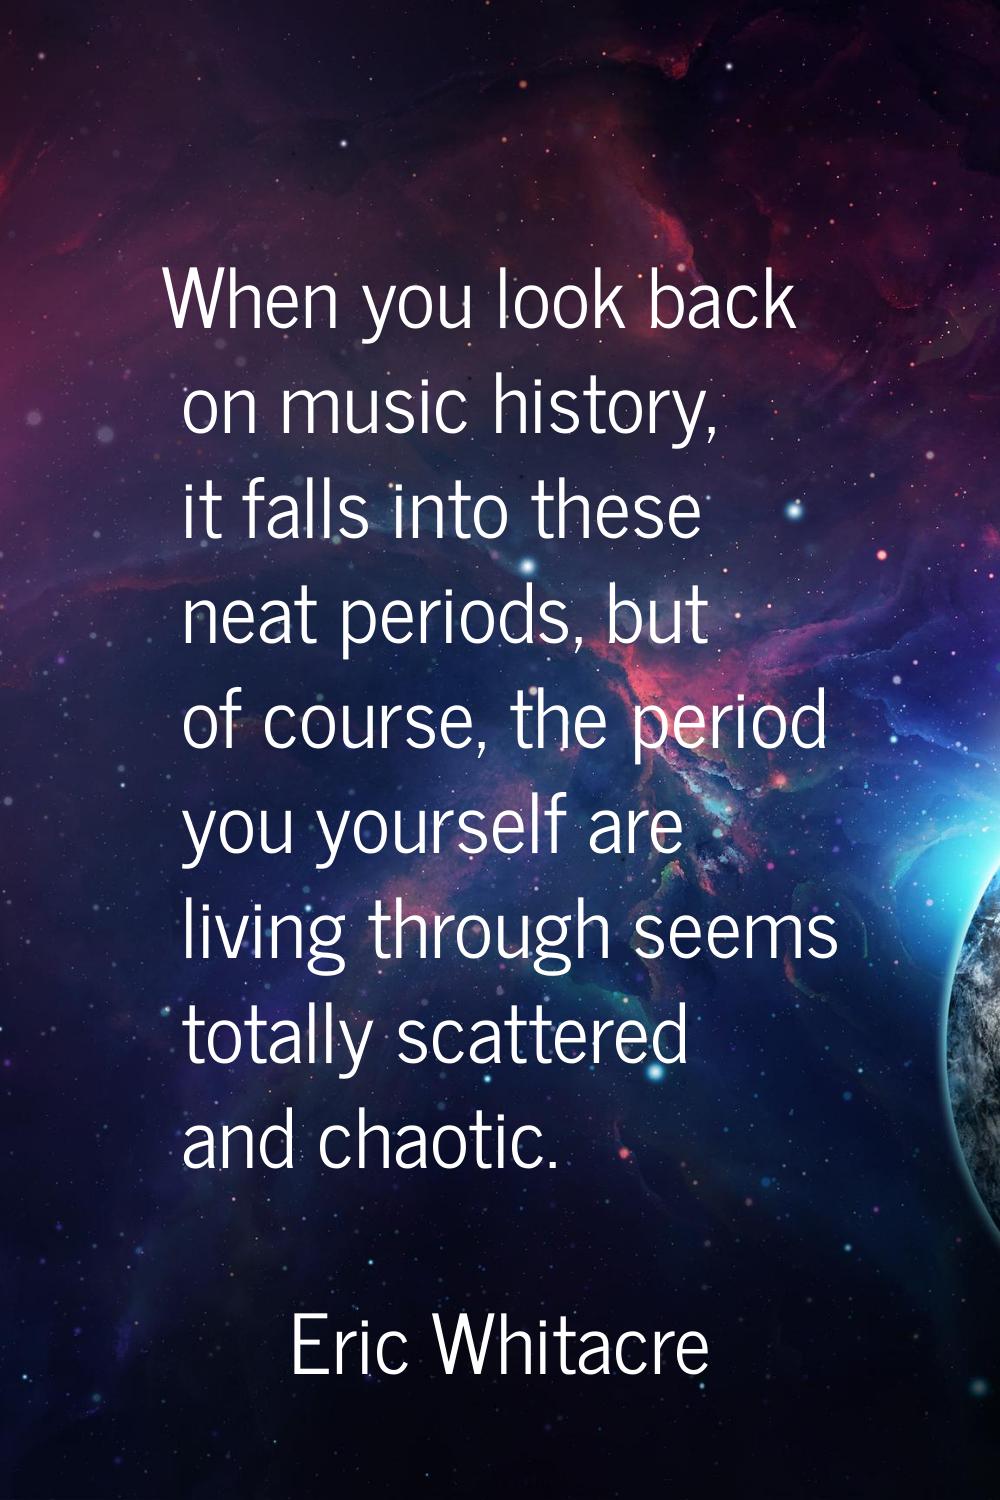 When you look back on music history, it falls into these neat periods, but of course, the period yo